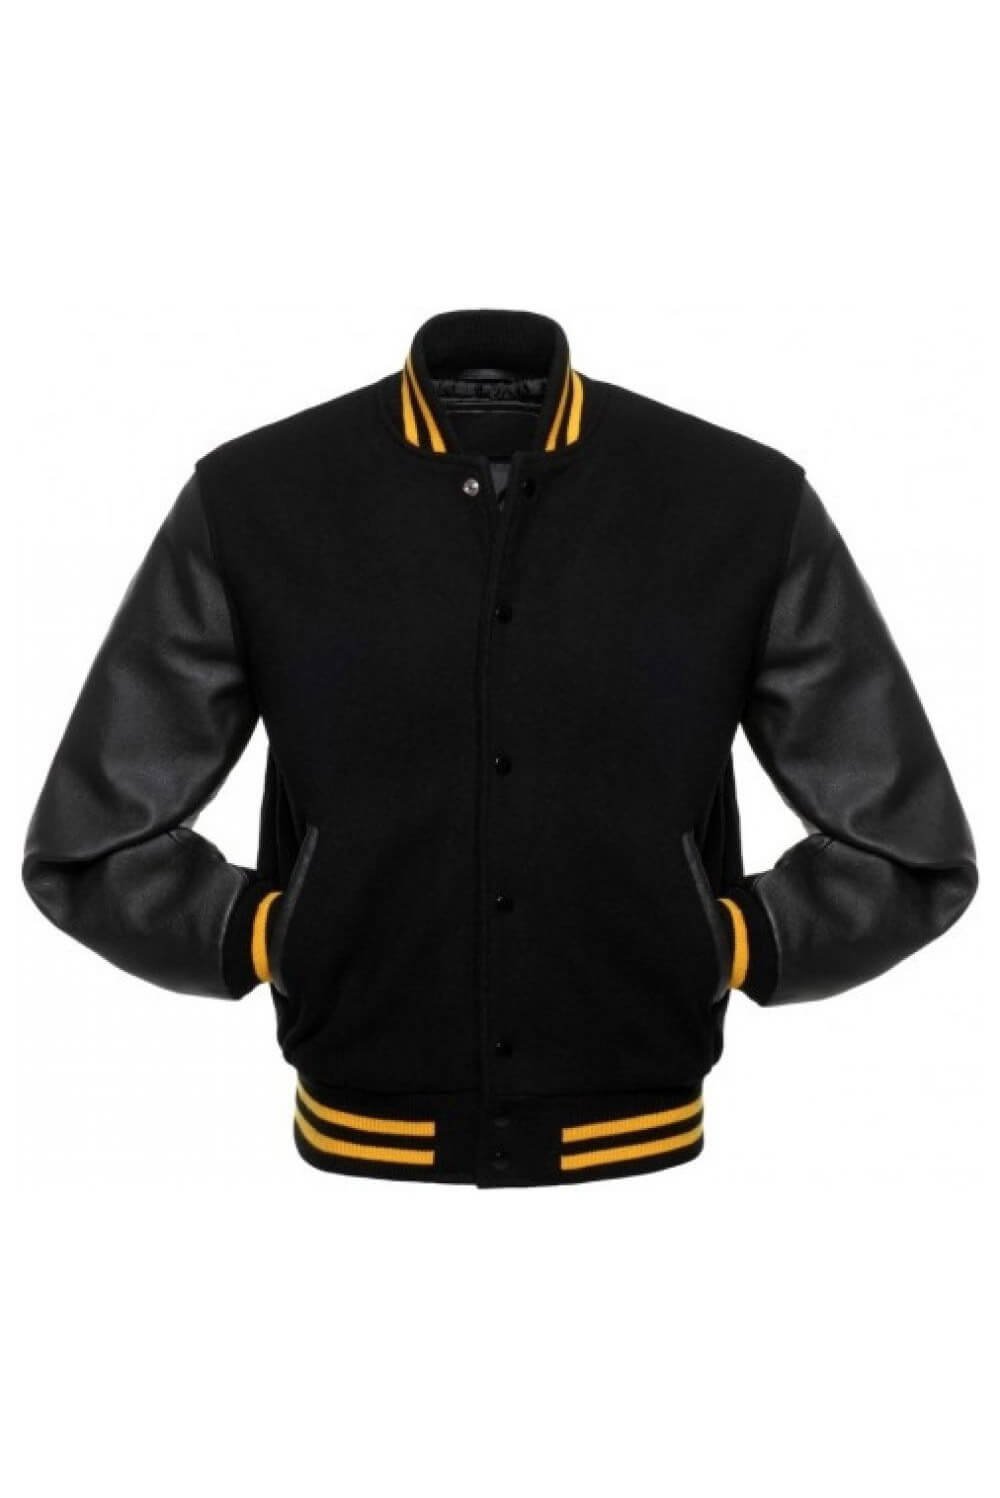 Black and Gold Striped Letterman Jacket with Black Leather Sleeves